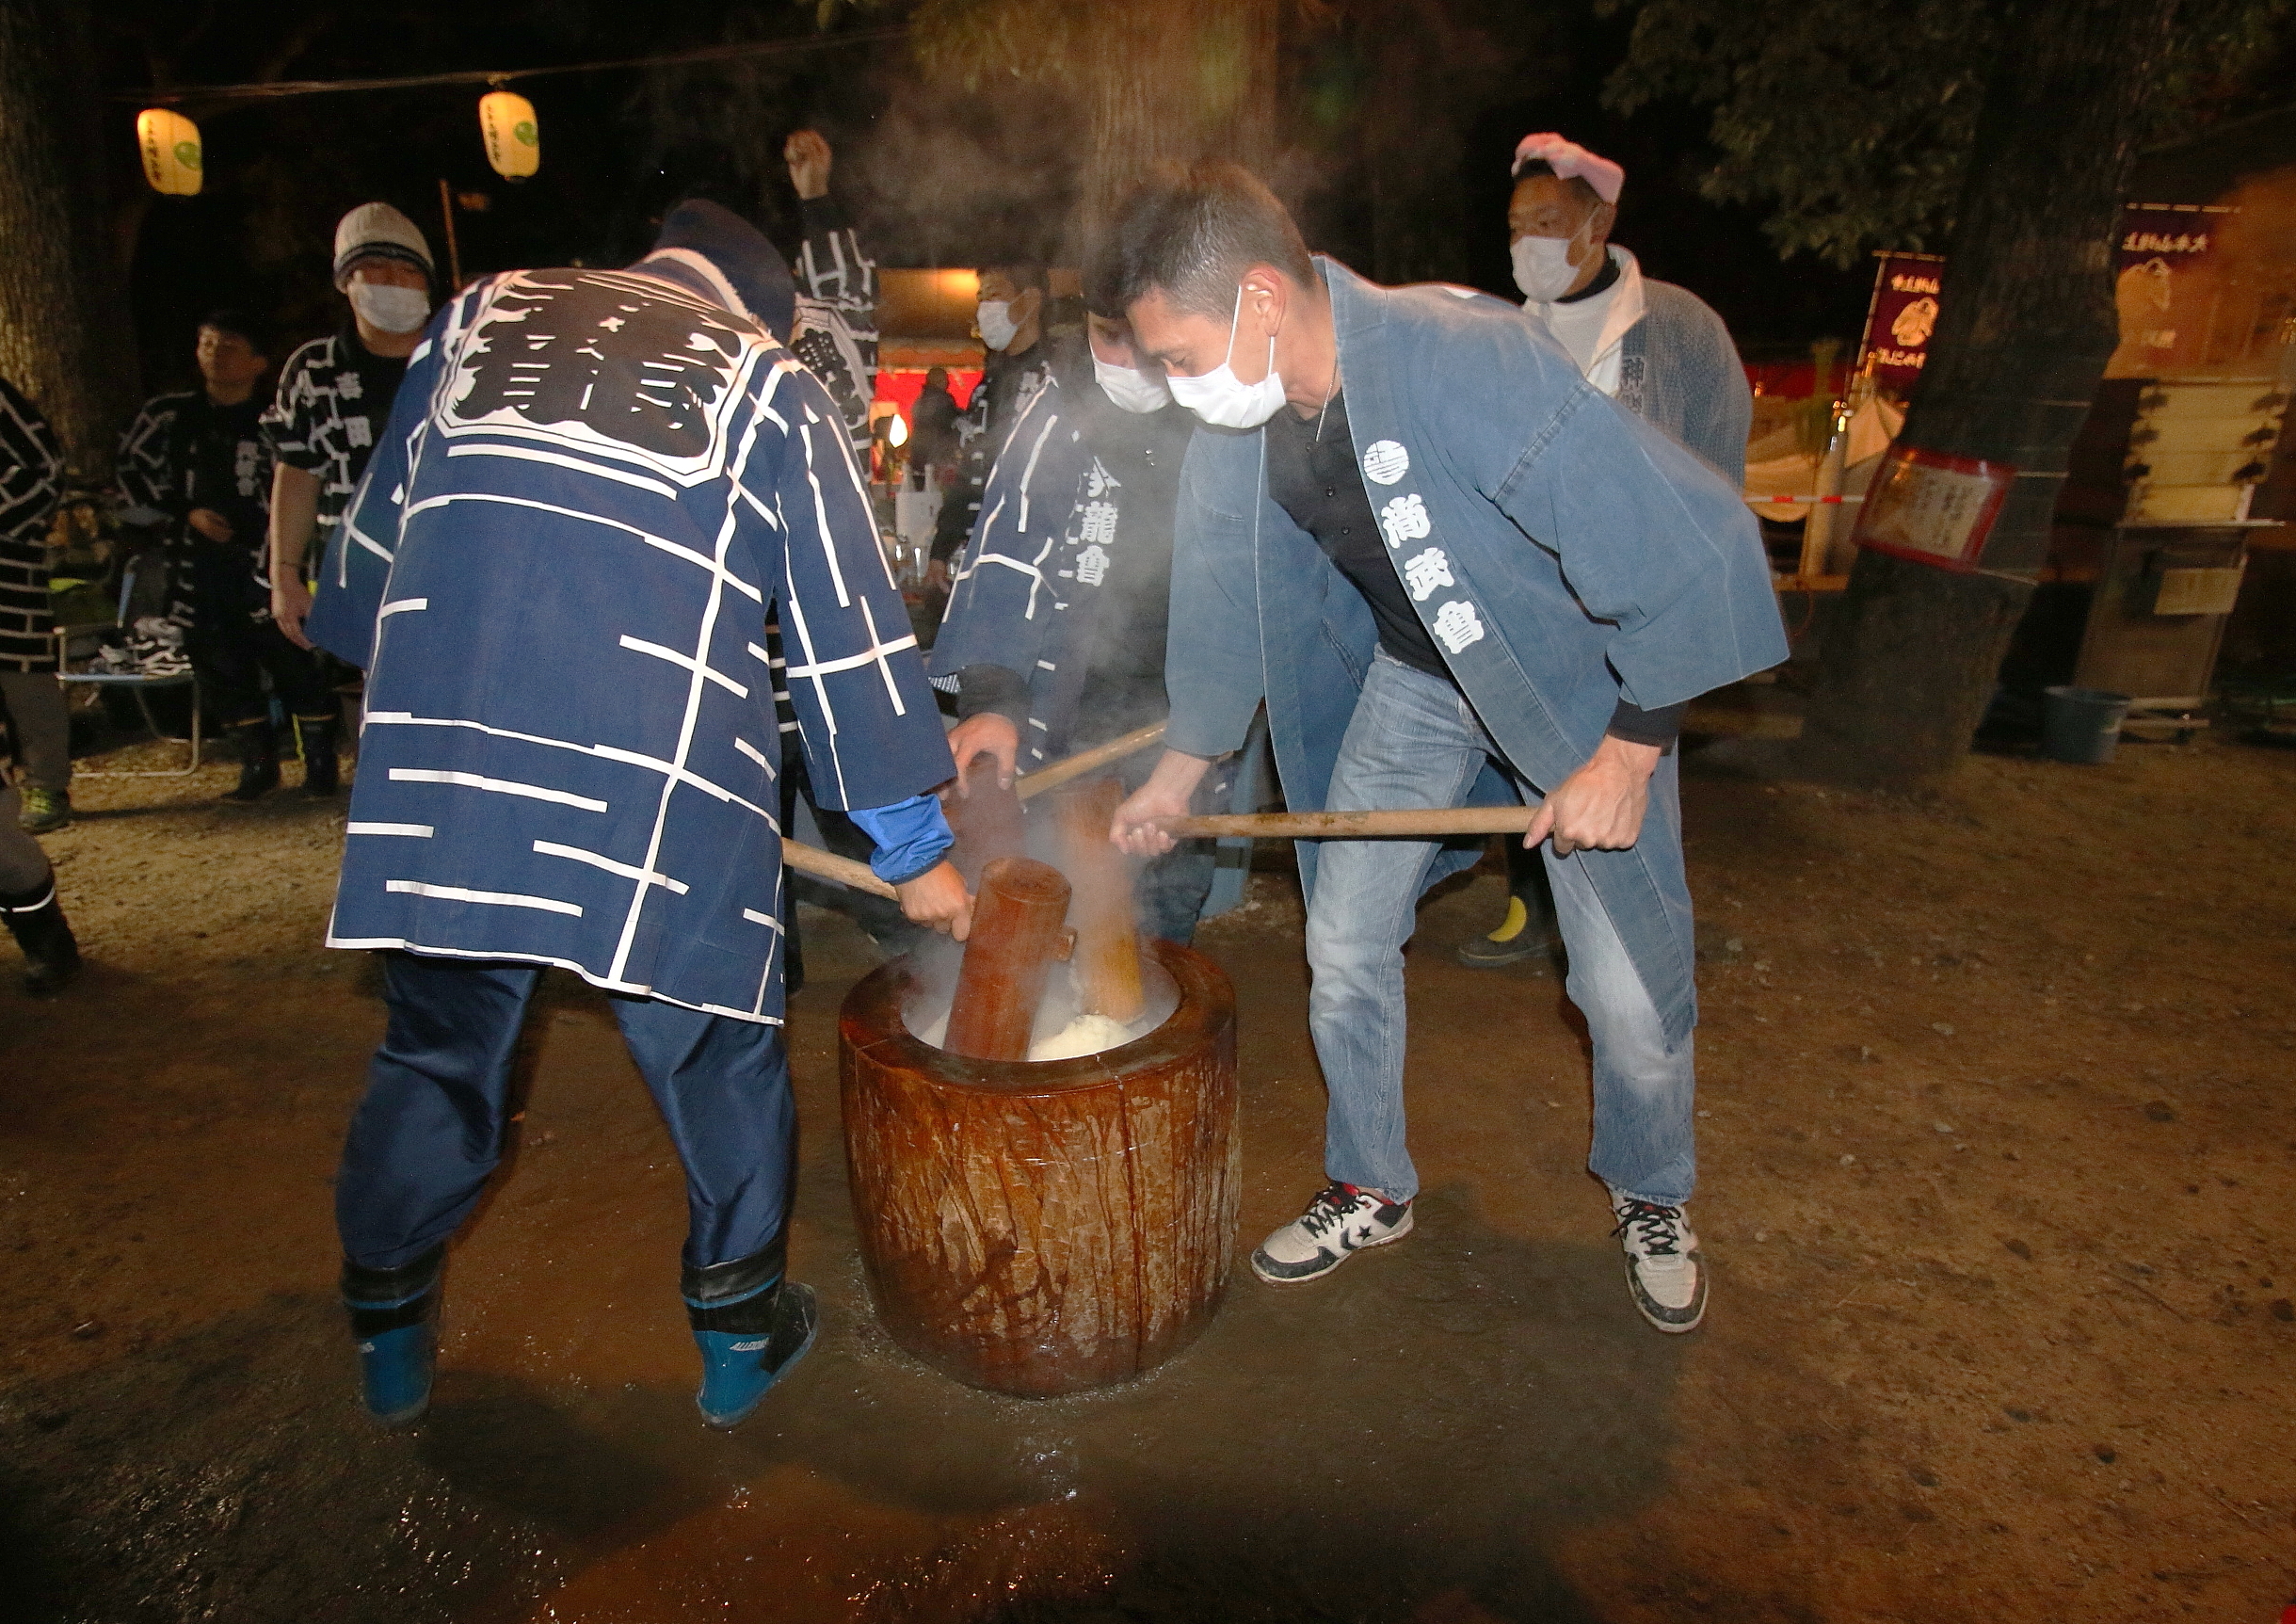 Men pound mochi with a mortar and pestle